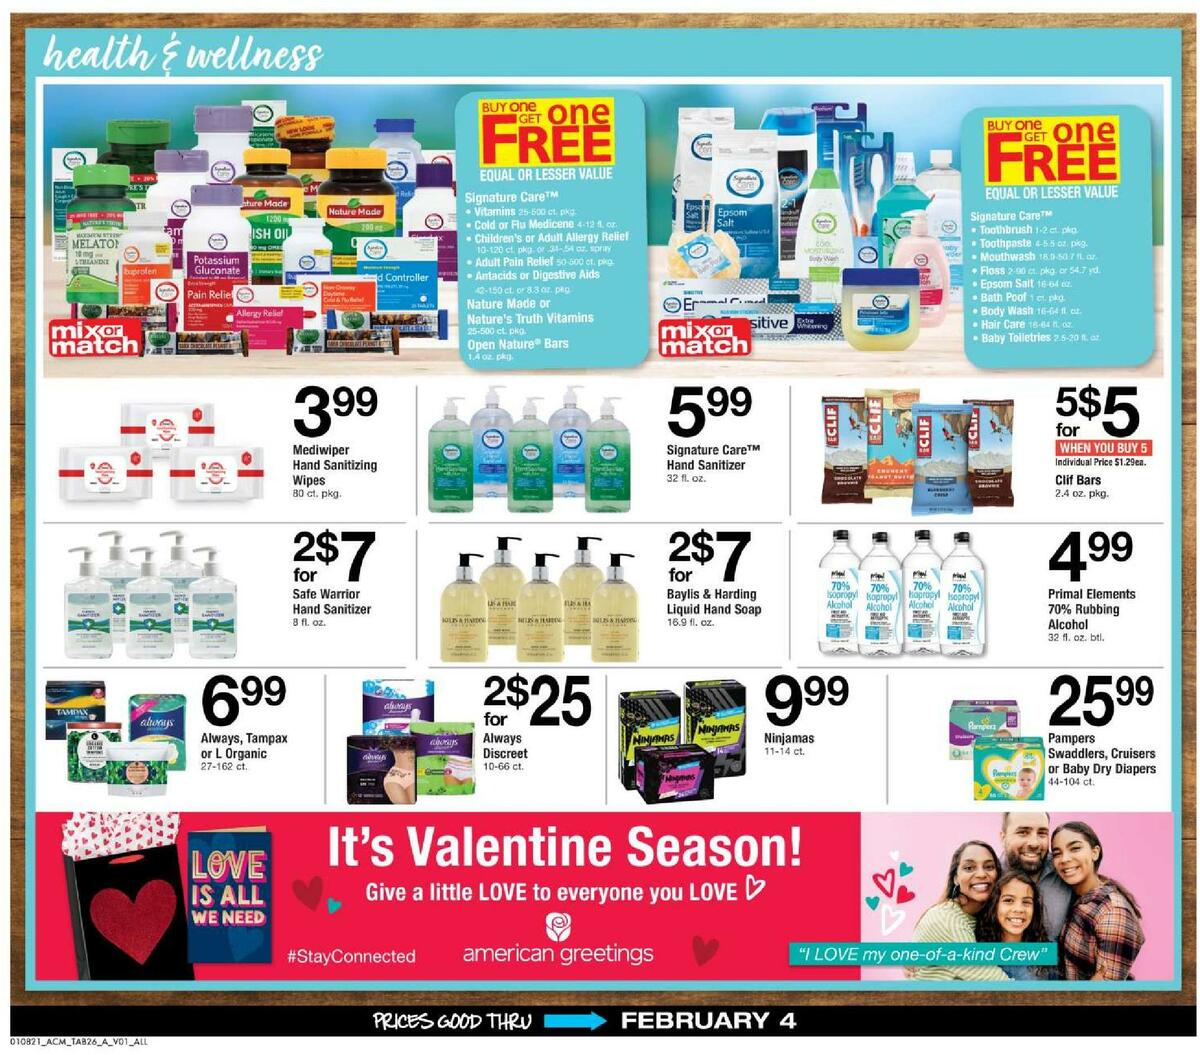 ACME Markets Big Book Weekly Ad from January 8